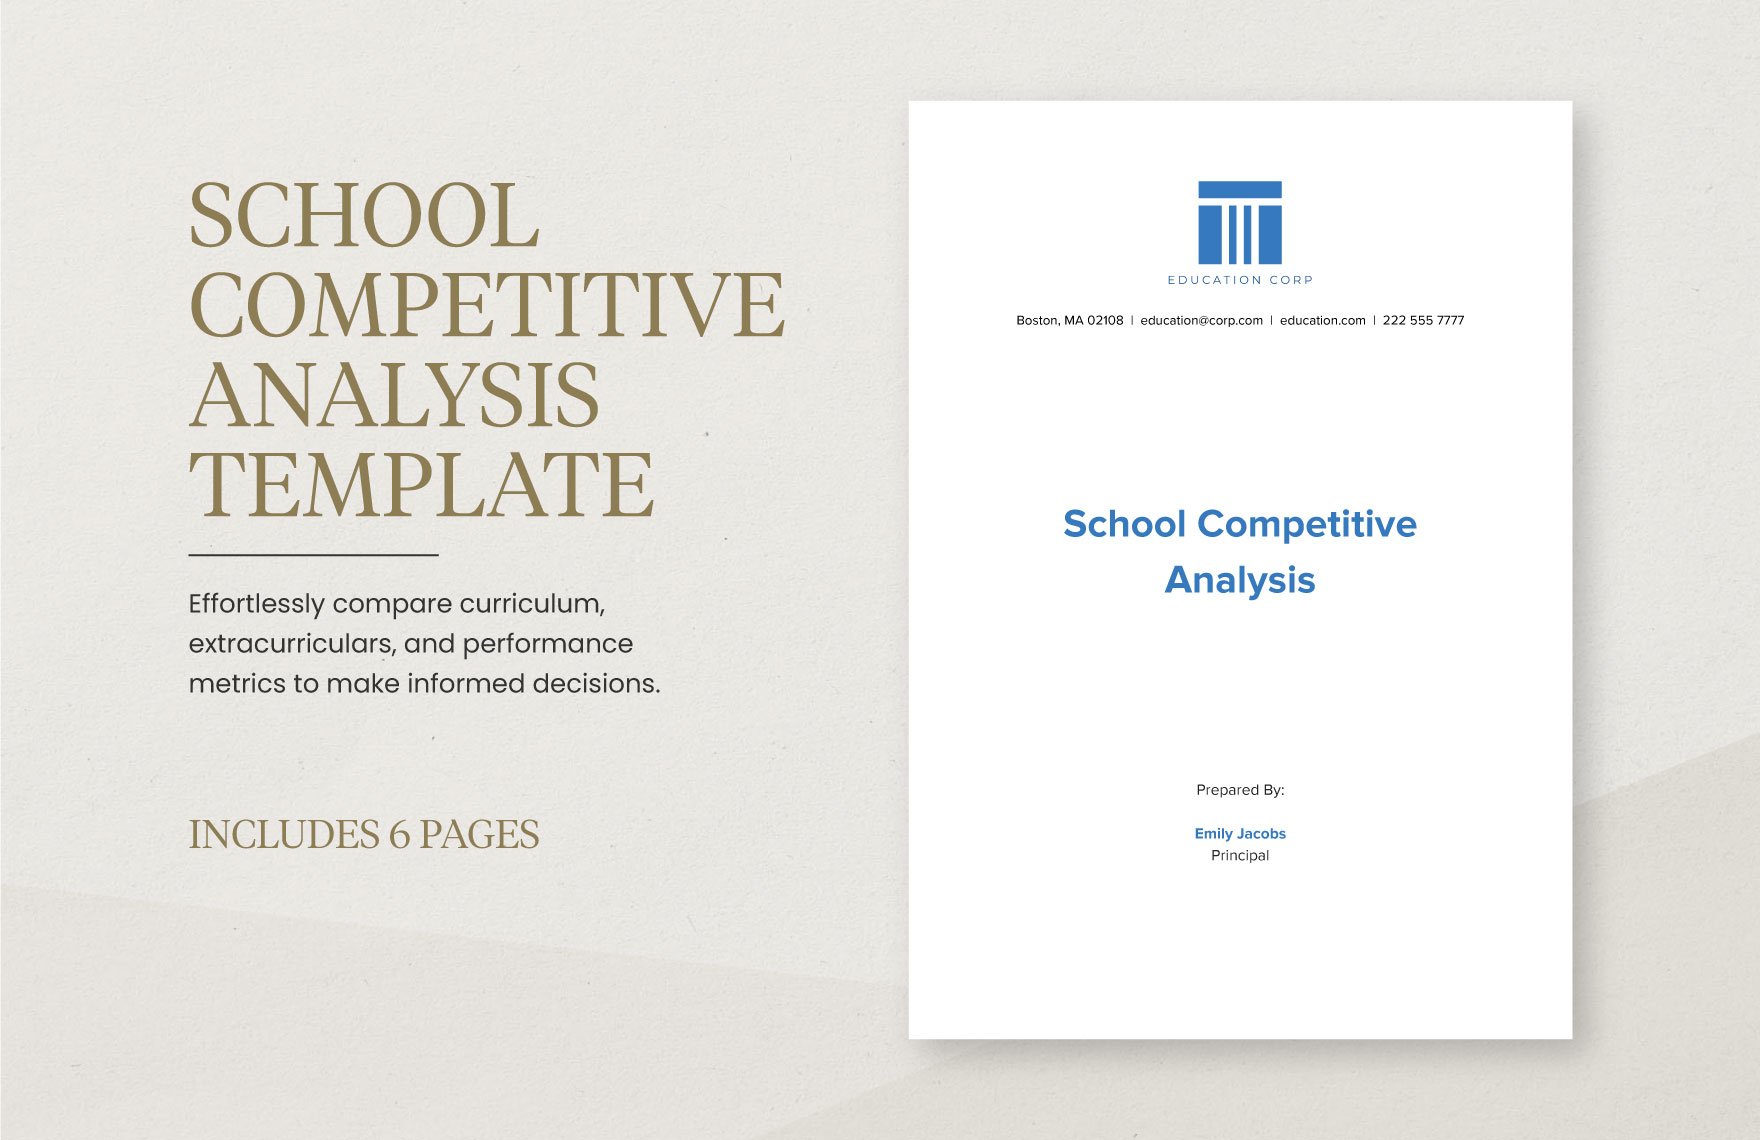 School Competitive Analysis Template